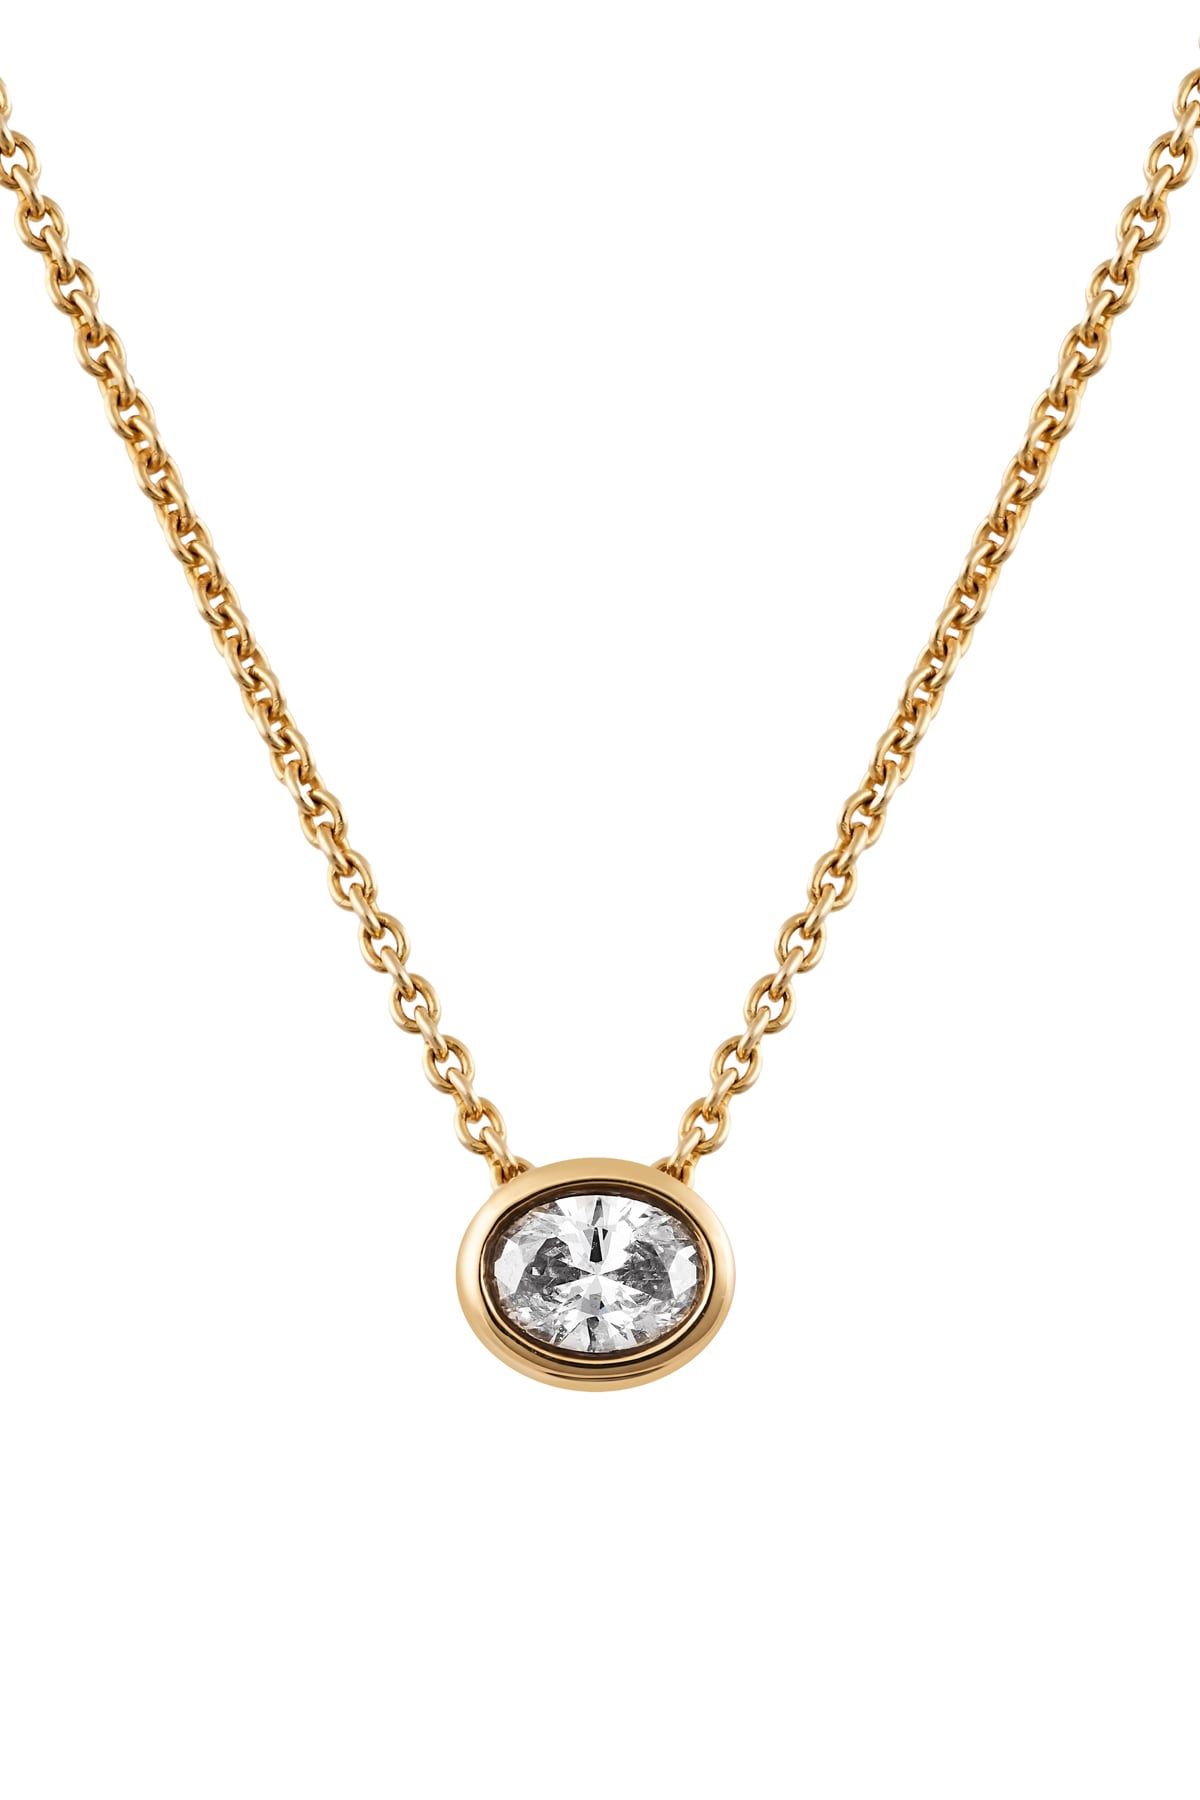 Oval Cut Diamond Slider Pendant and Chain in 9ct Yellow Gold from LeGassick Jewellery Gold Coast, Australia.